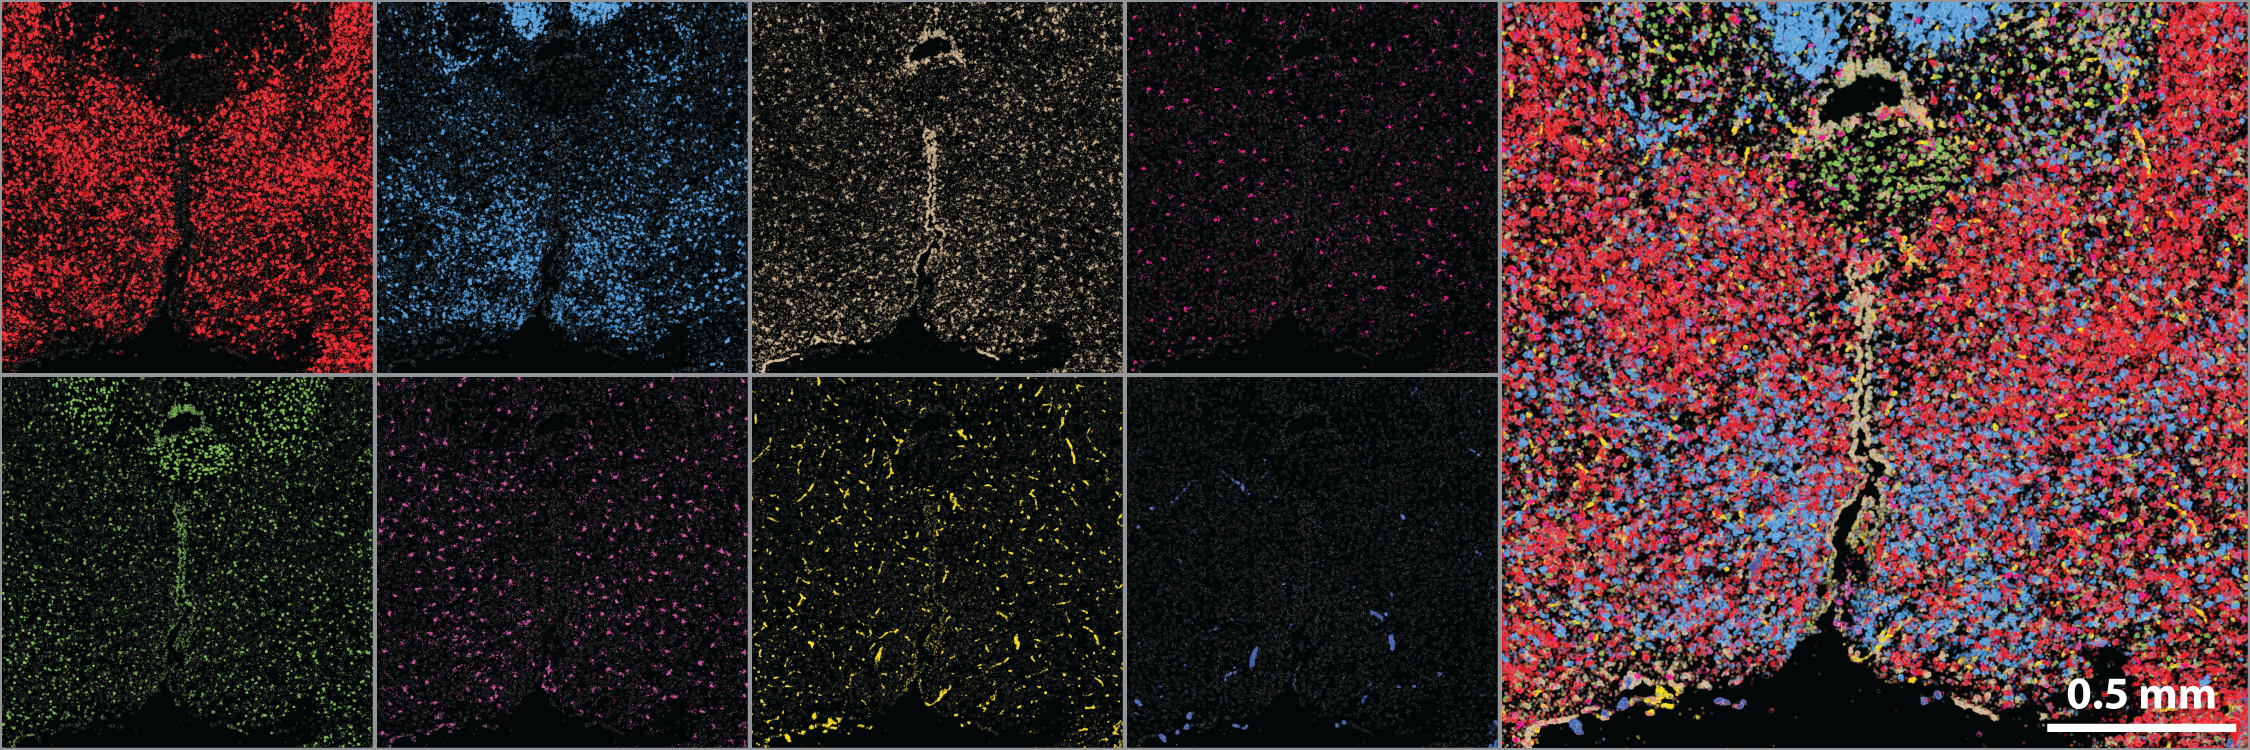 Example images of 8 of 155 different RNAs simultaneously measured within a single slice of the mouse brain.